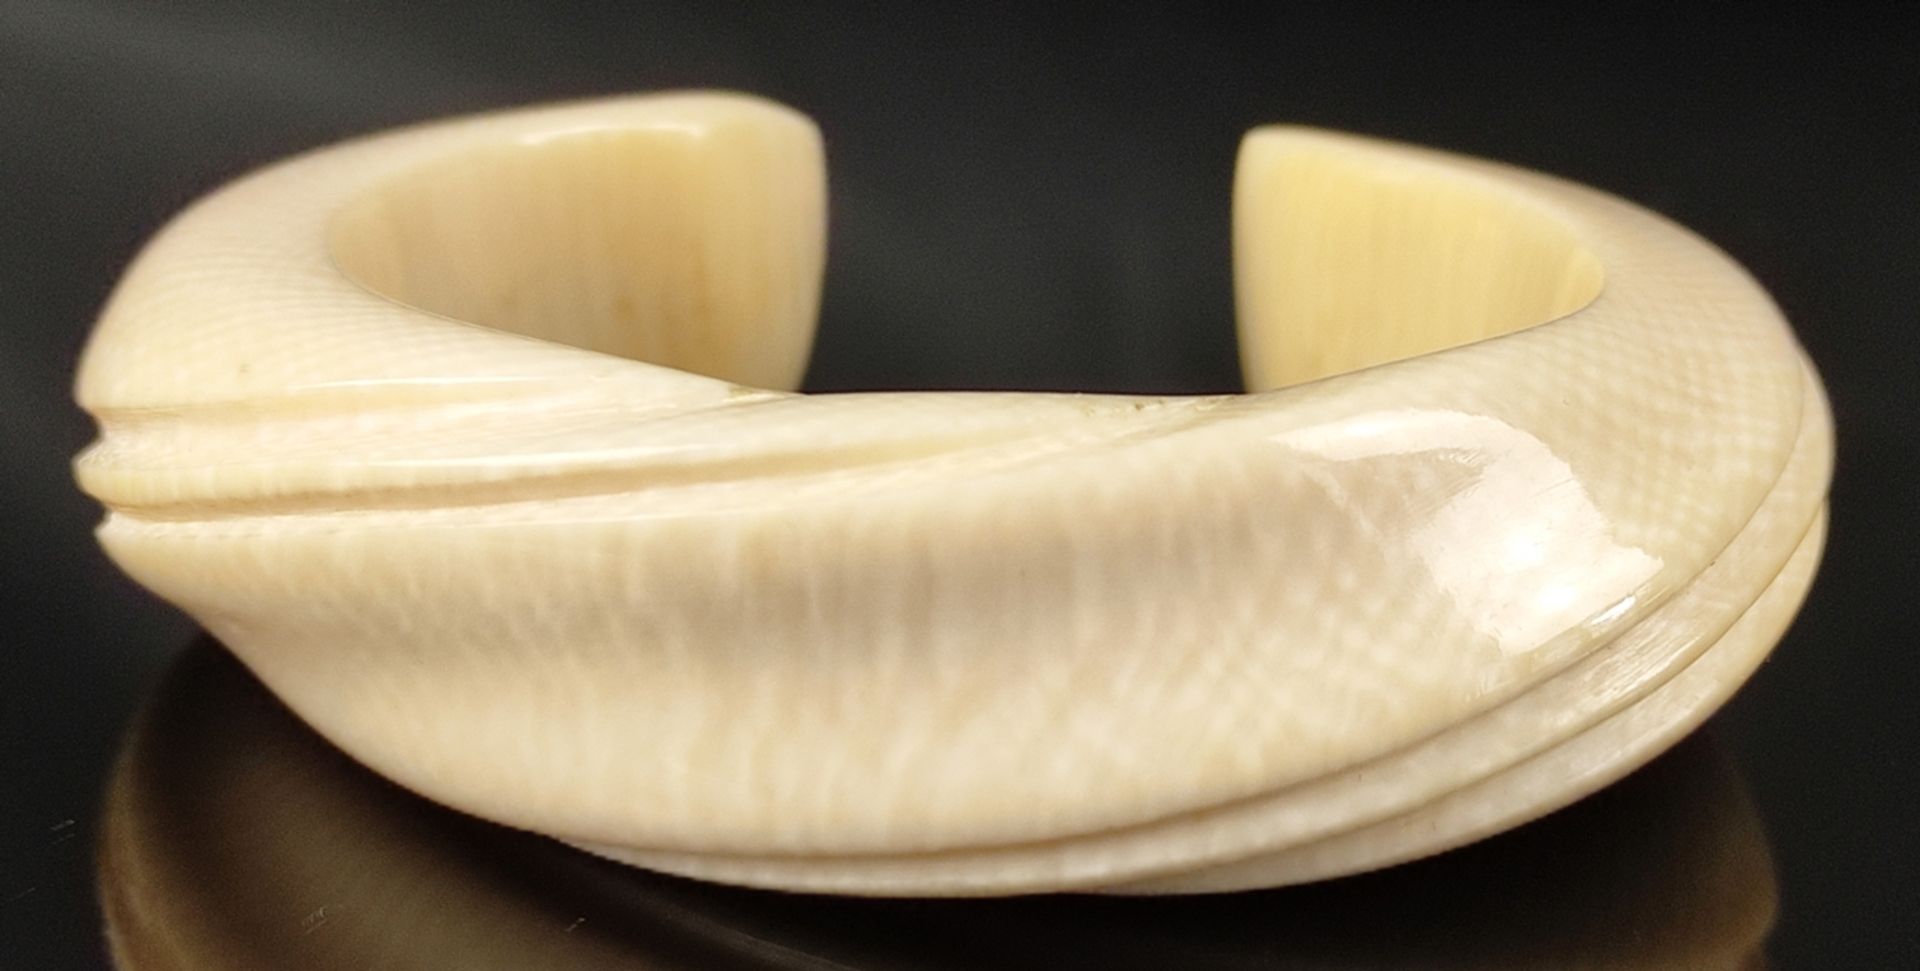 Bangle, oval, ivory, 1950s, width approx. 2cm, diameter at largest point 5.5cm, for narrow wrist